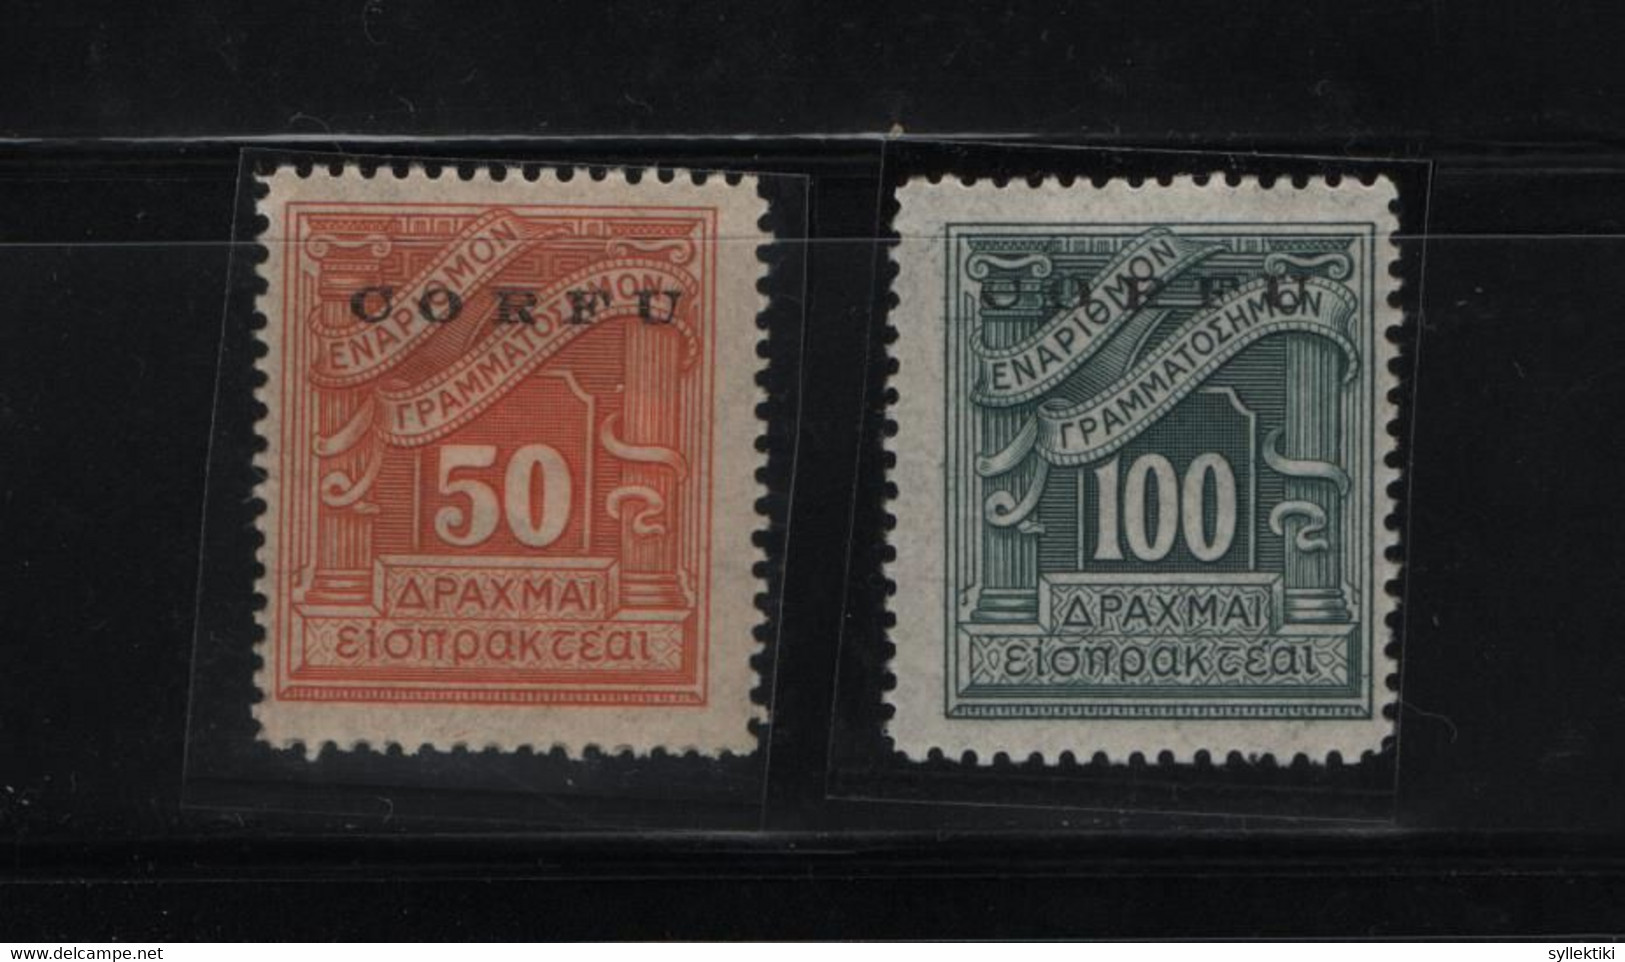 GREECE 1941 CORFU OVERPRINT ON POSTAGE DUE 2 DIFFERENT MNH STAMPS  HELLAS No 44 - 45 AND VALUE  EURO 2320.00 - Isole Ioniche